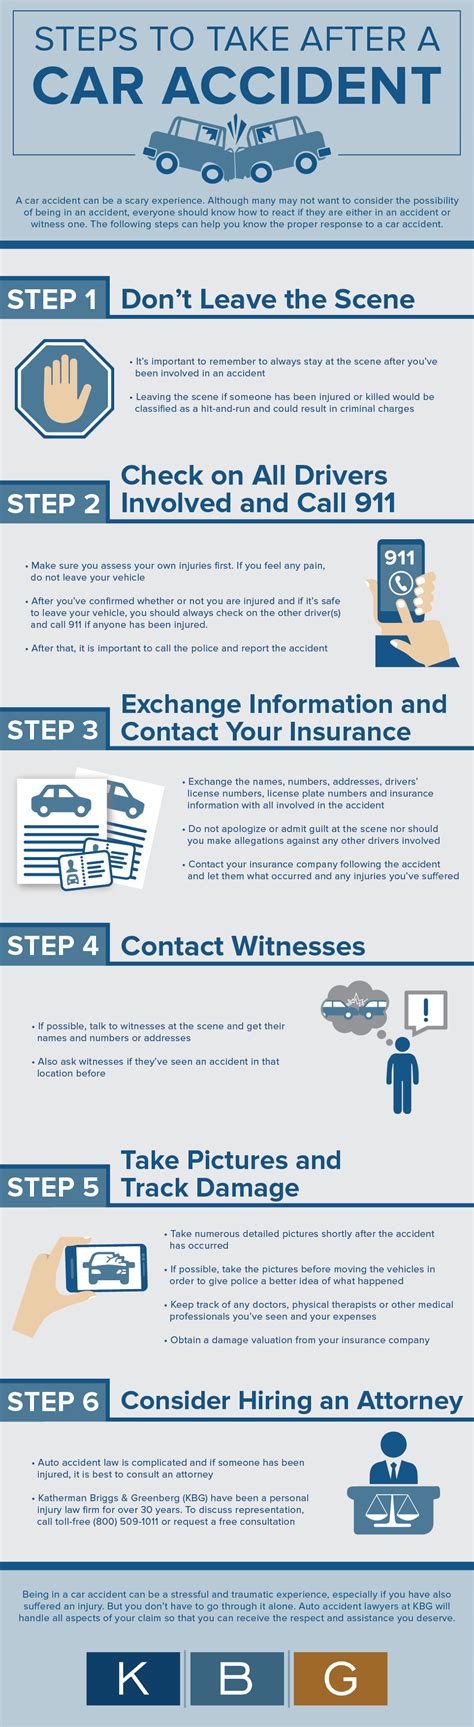 Steps To Take After A Car Accident Infographic Kbg Injury Law